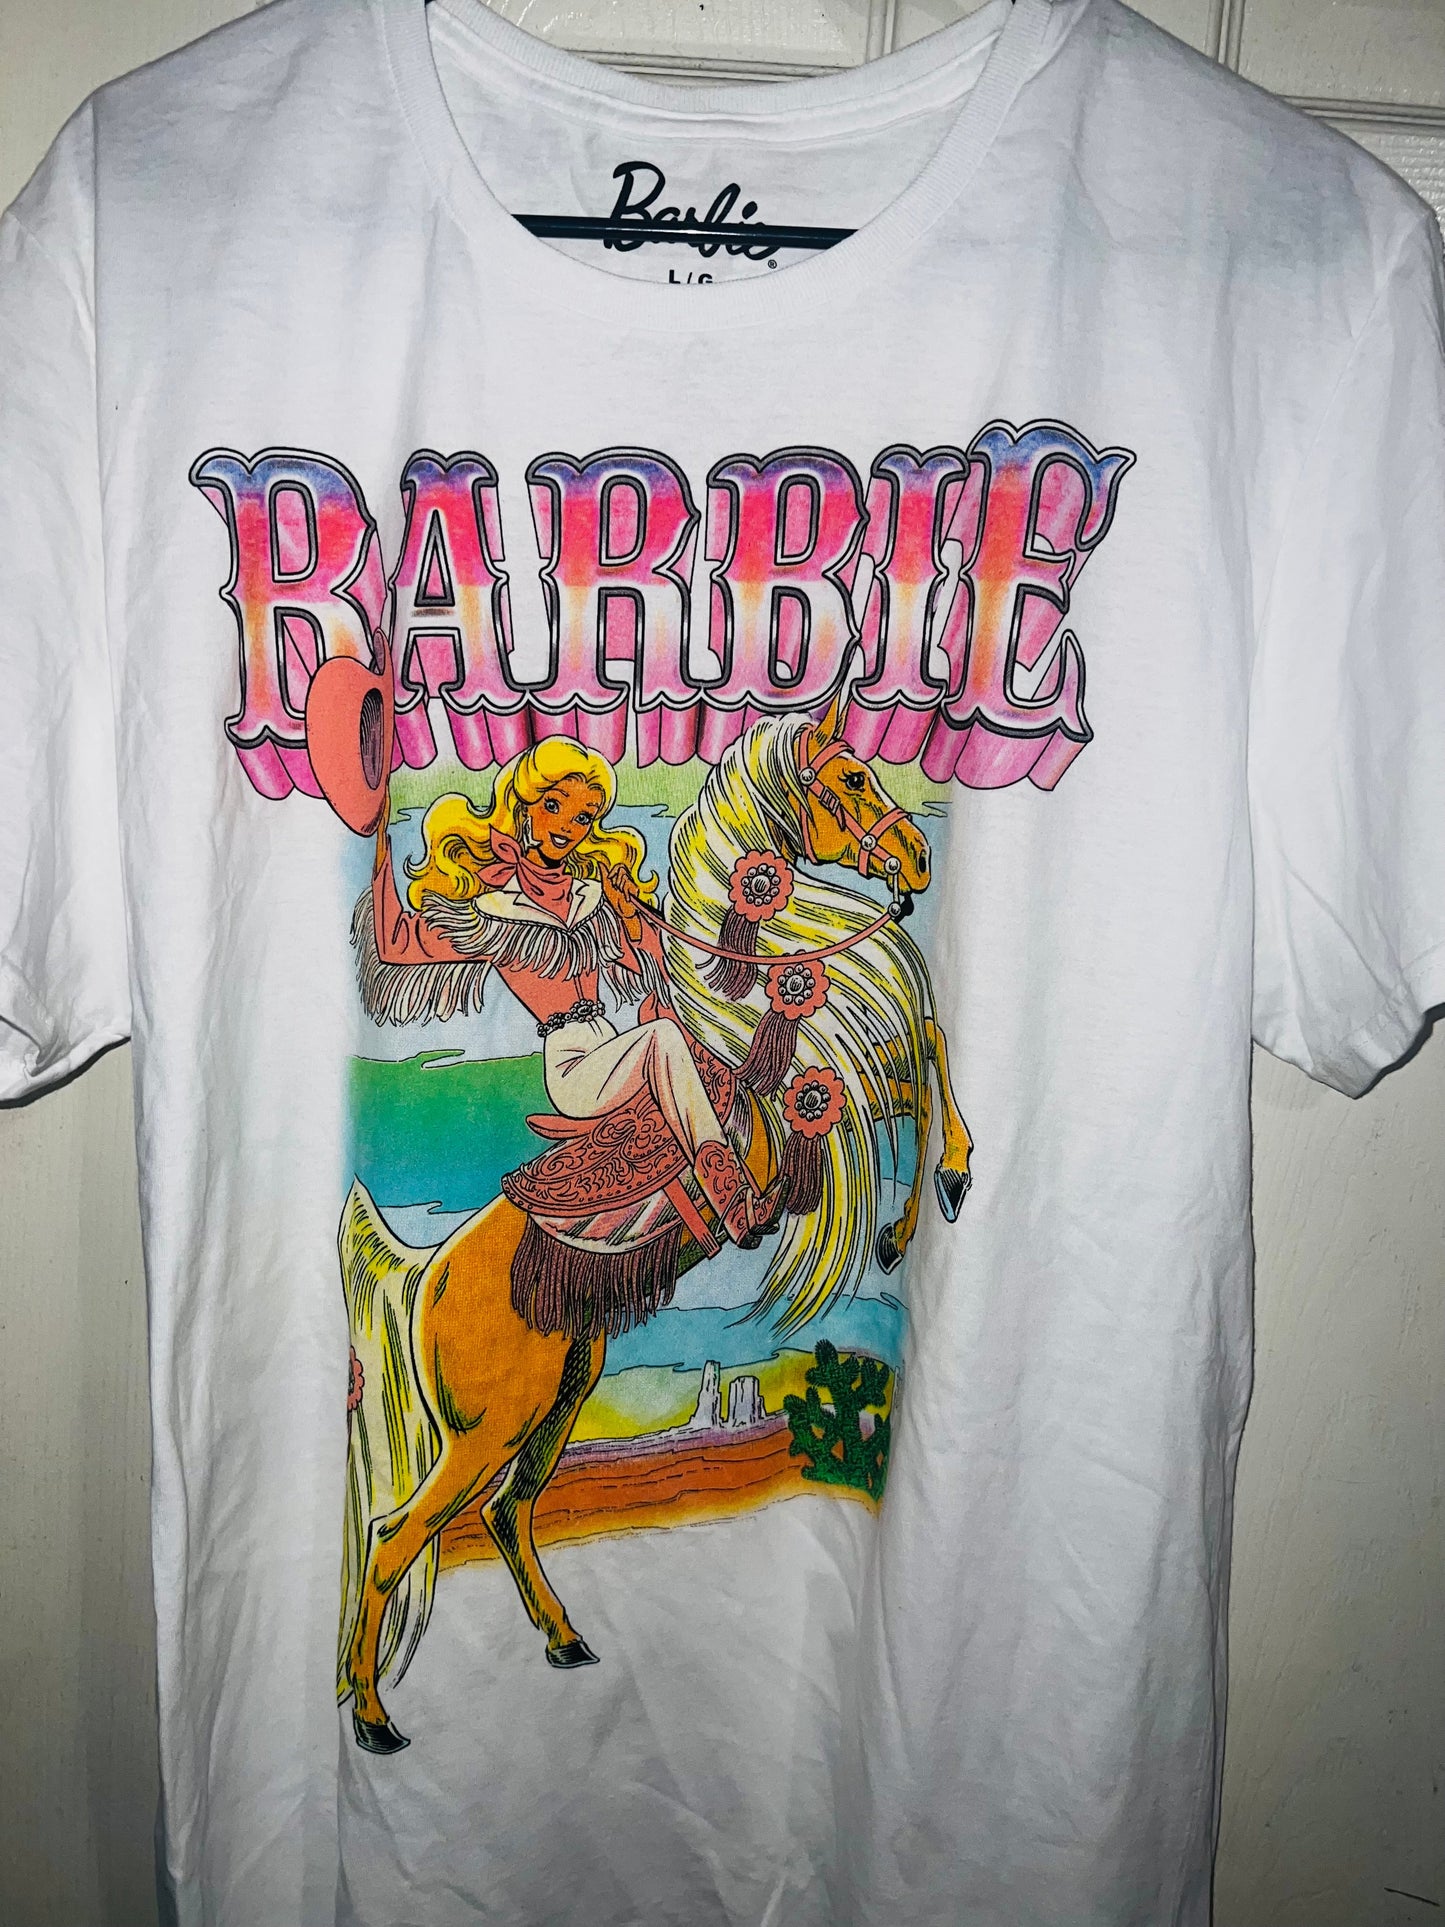 Barbie Cowgirl Oversized Distressed Tee